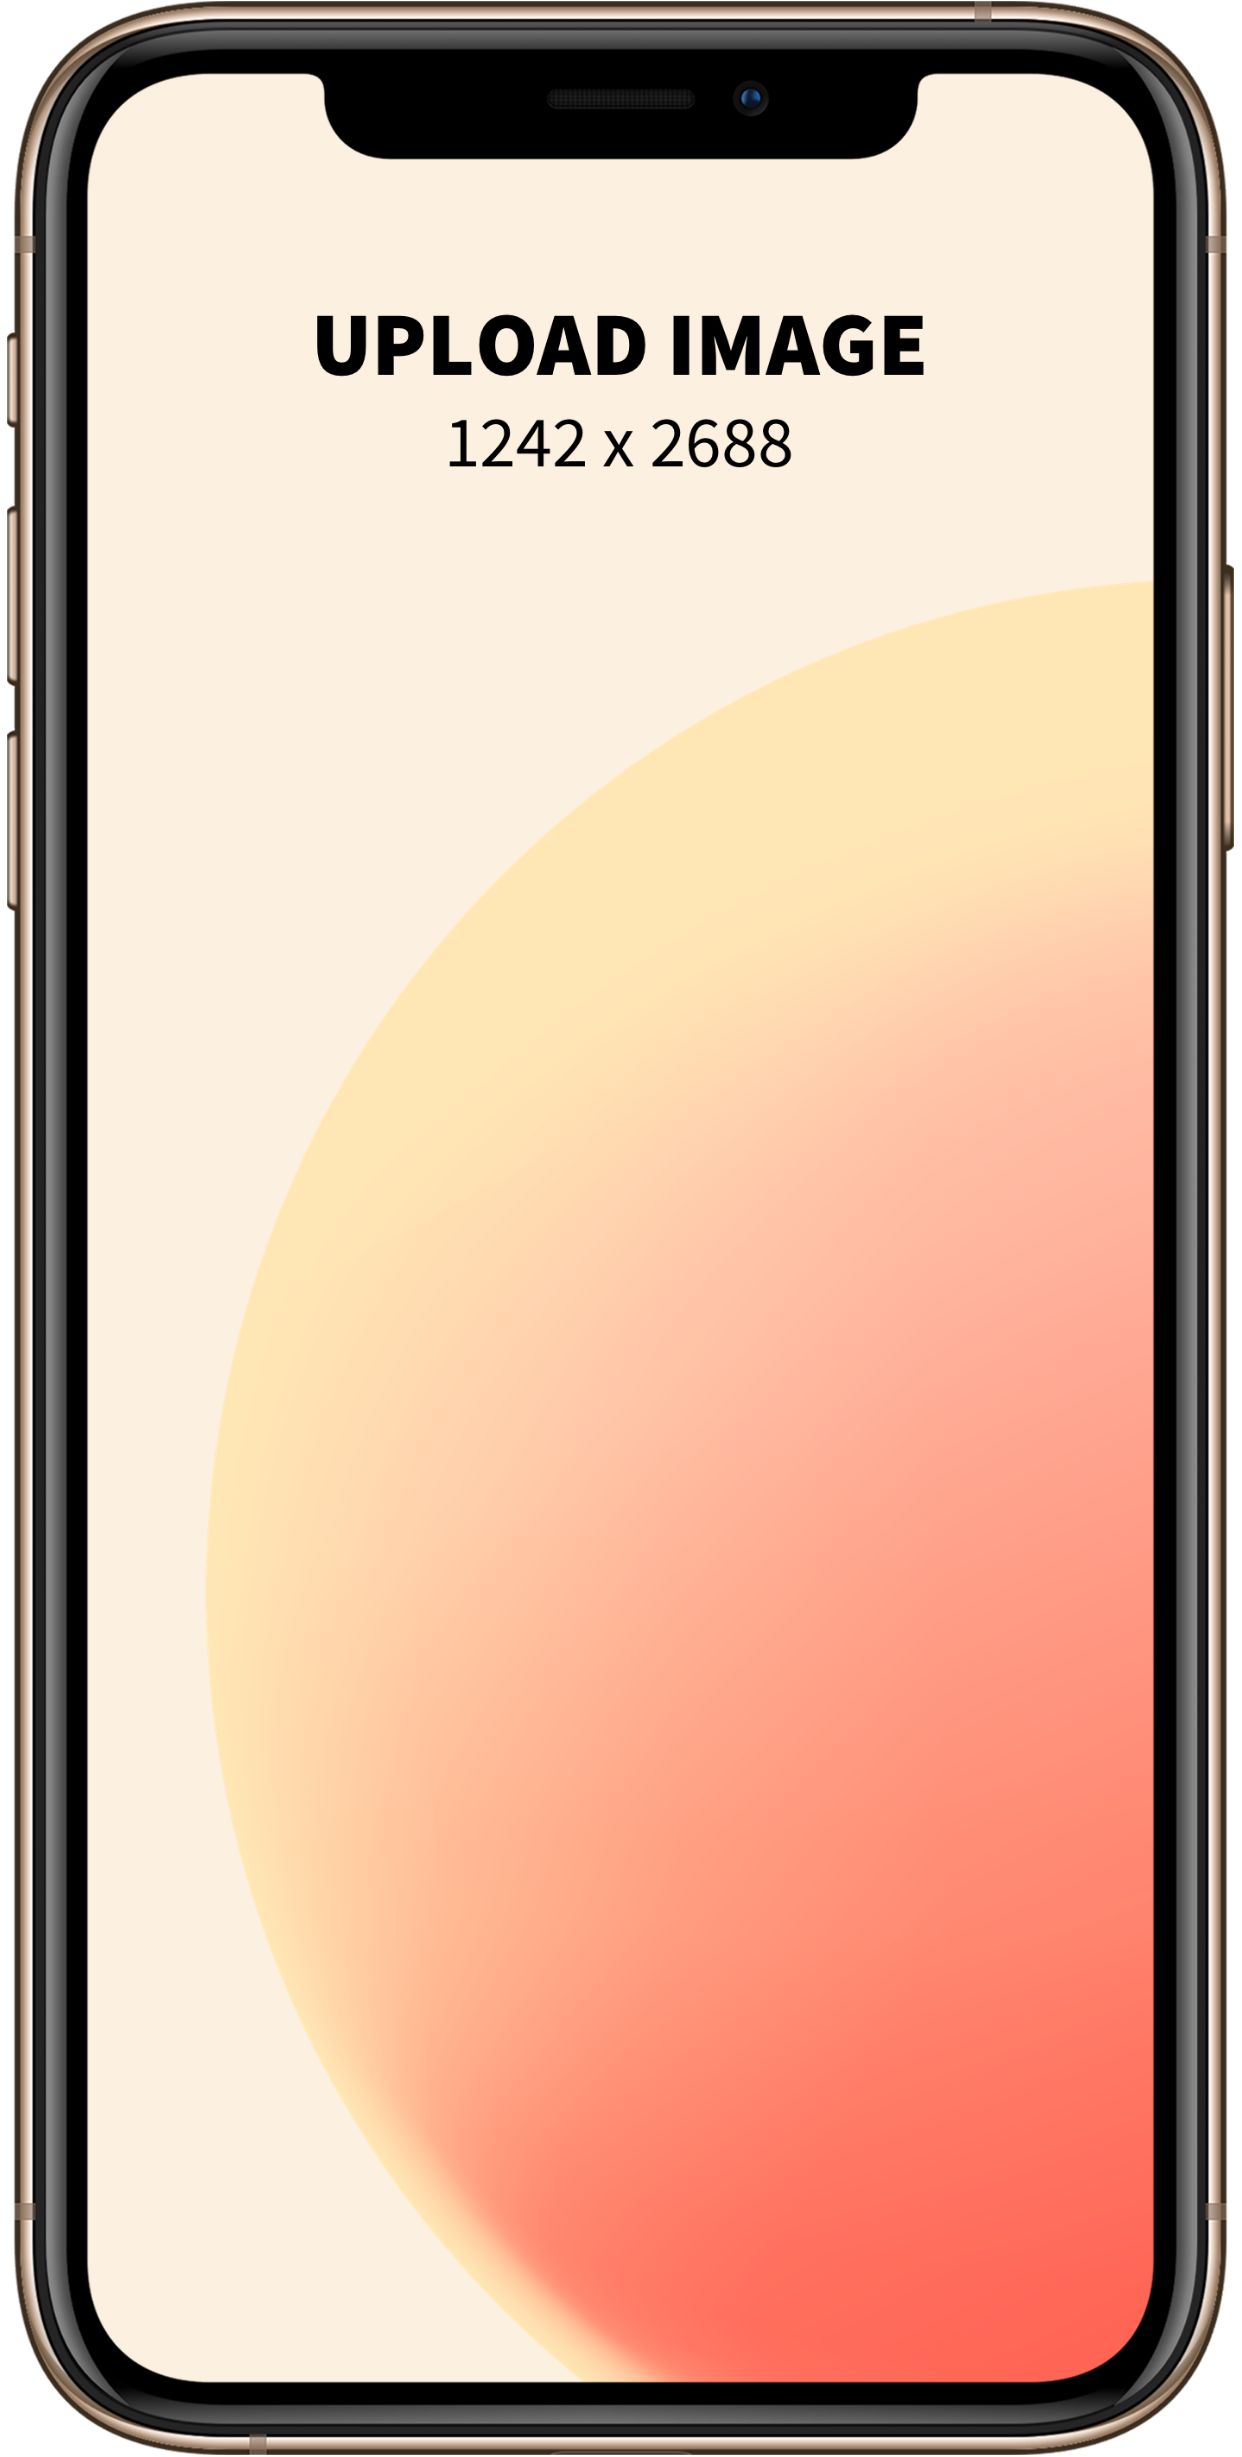 iPhone XS Max Mockup 7 template. Quickly edit fonts, text, colors, and more for free.